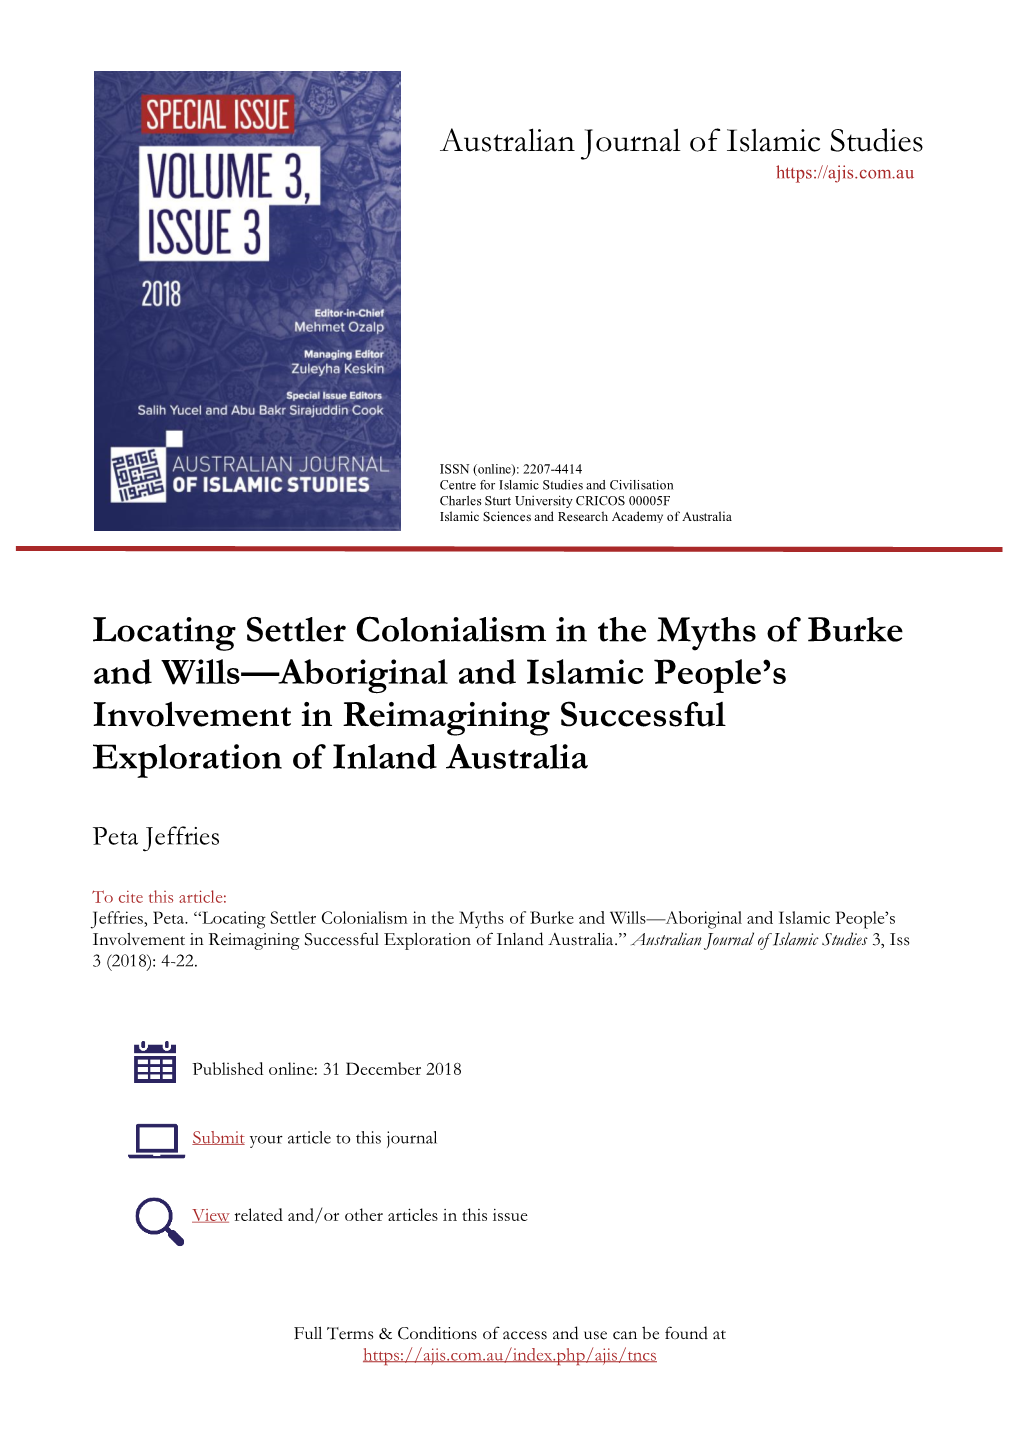 Locating Settler Colonialism in the Myths of Burke and Wills—Aboriginal and Islamic People’S Involvement in Reimagining Successful Exploration of Inland Australia